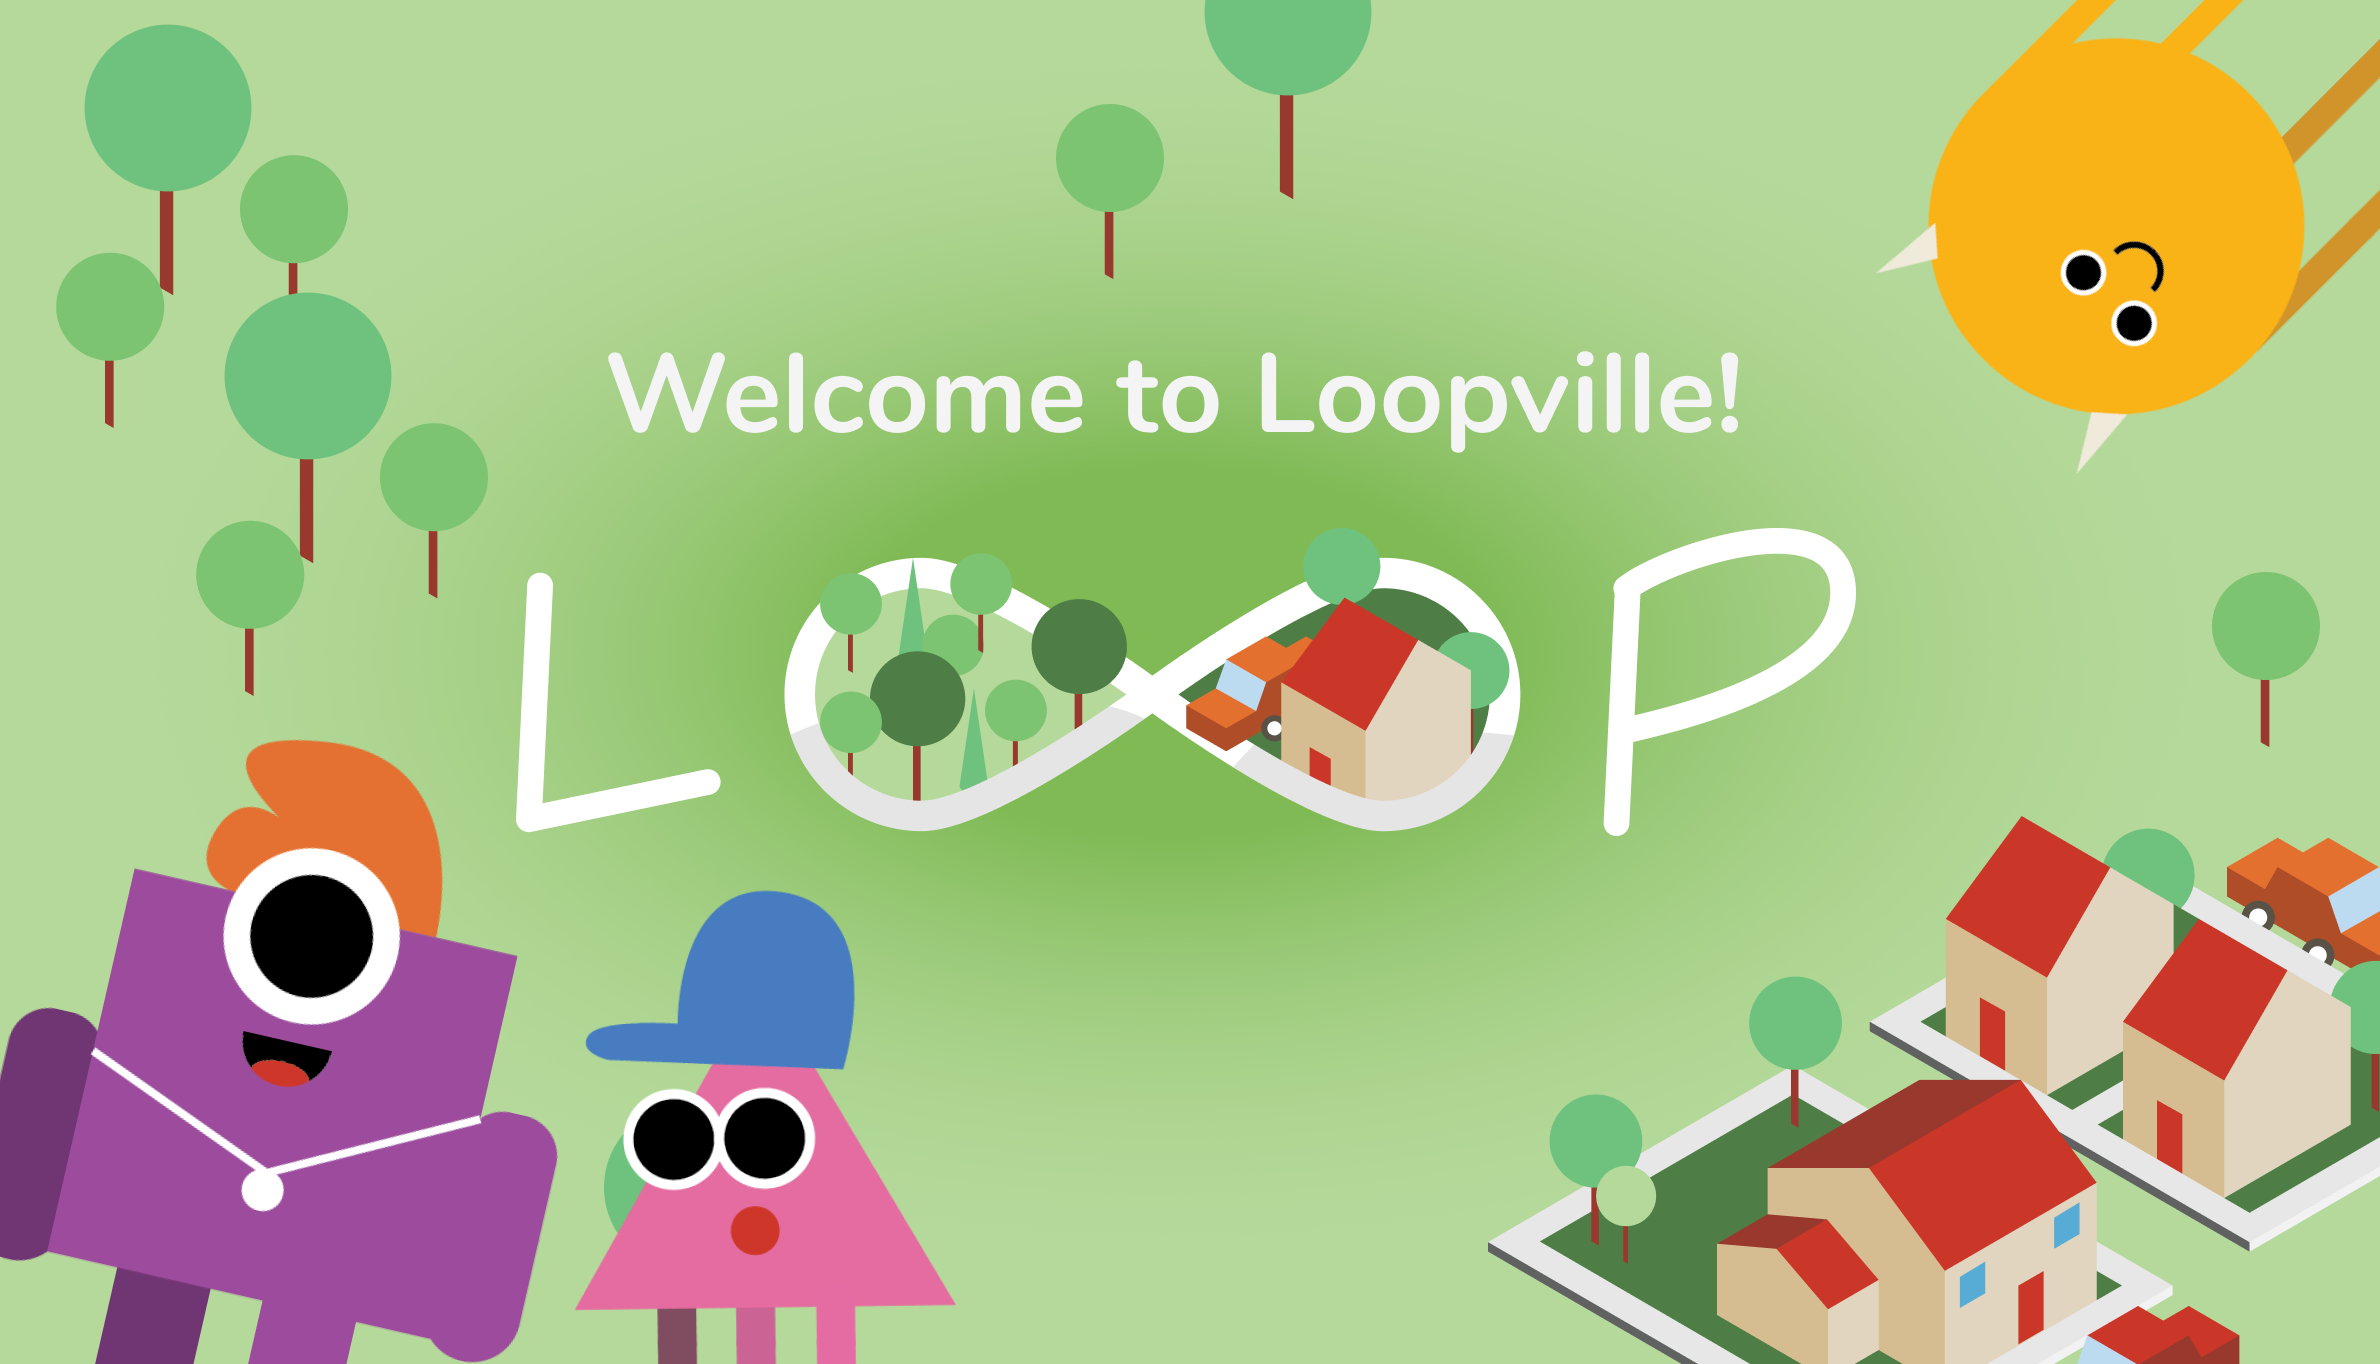 Welcome to Loopville!